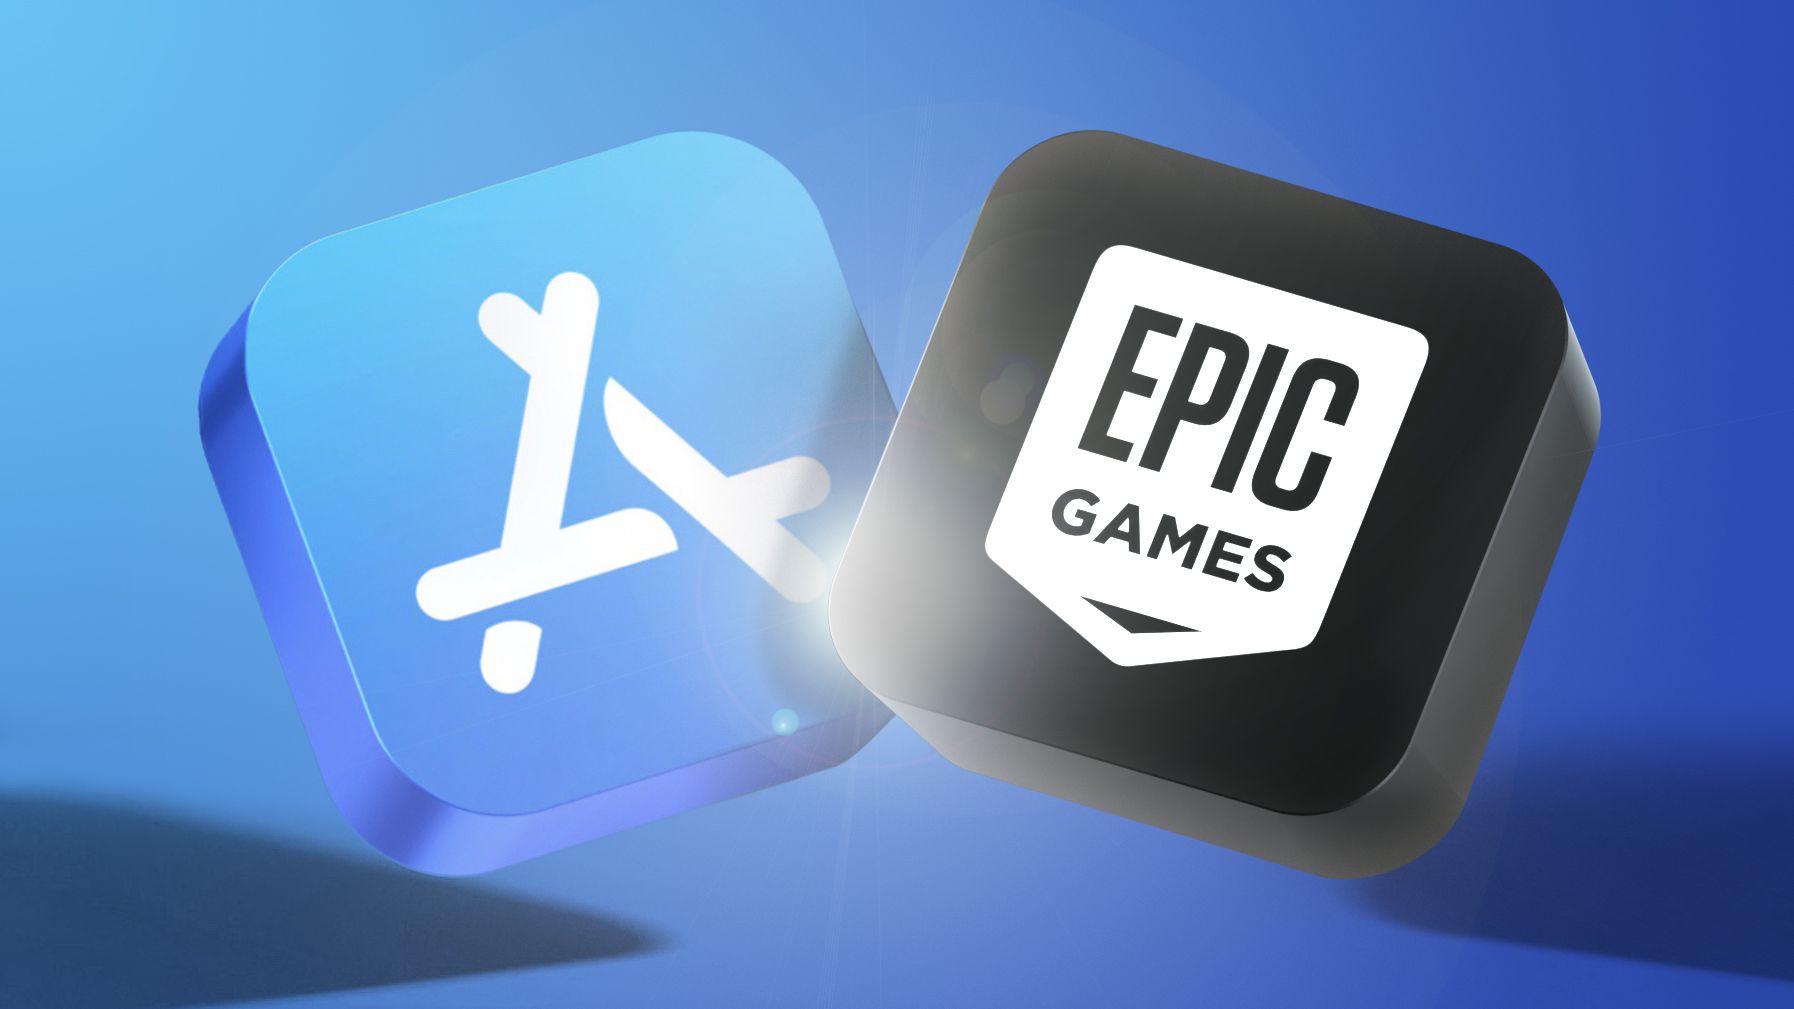 Epic Lost Trial Due to Flawed Argument, Not Legal Error, Apple Says in Appeals F..